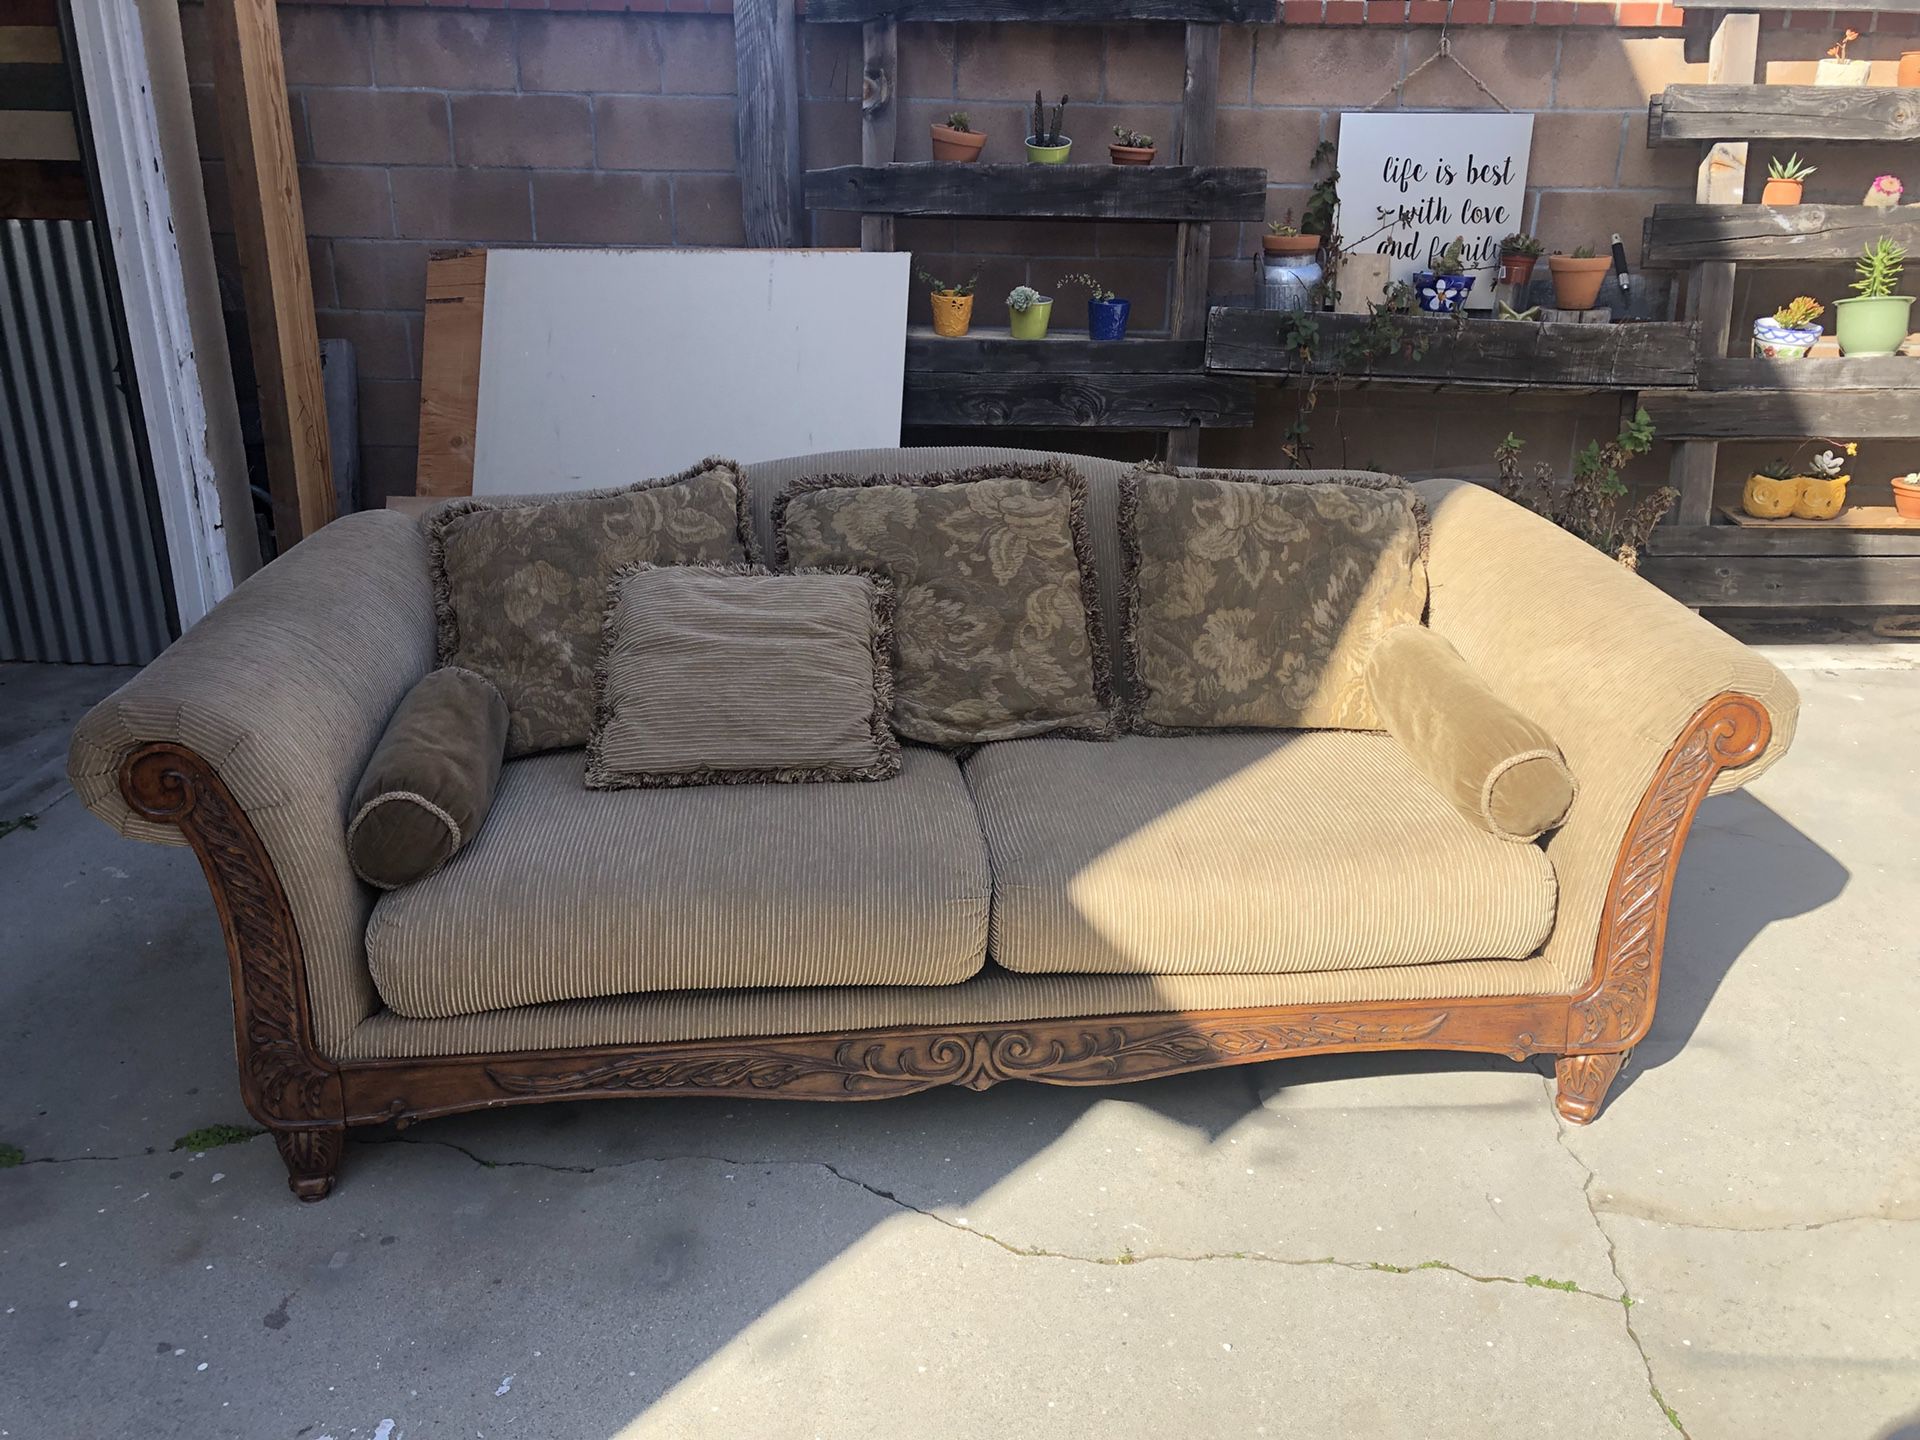 8 1/4 ft sofa. FREE. pick up only. San Pedro ca